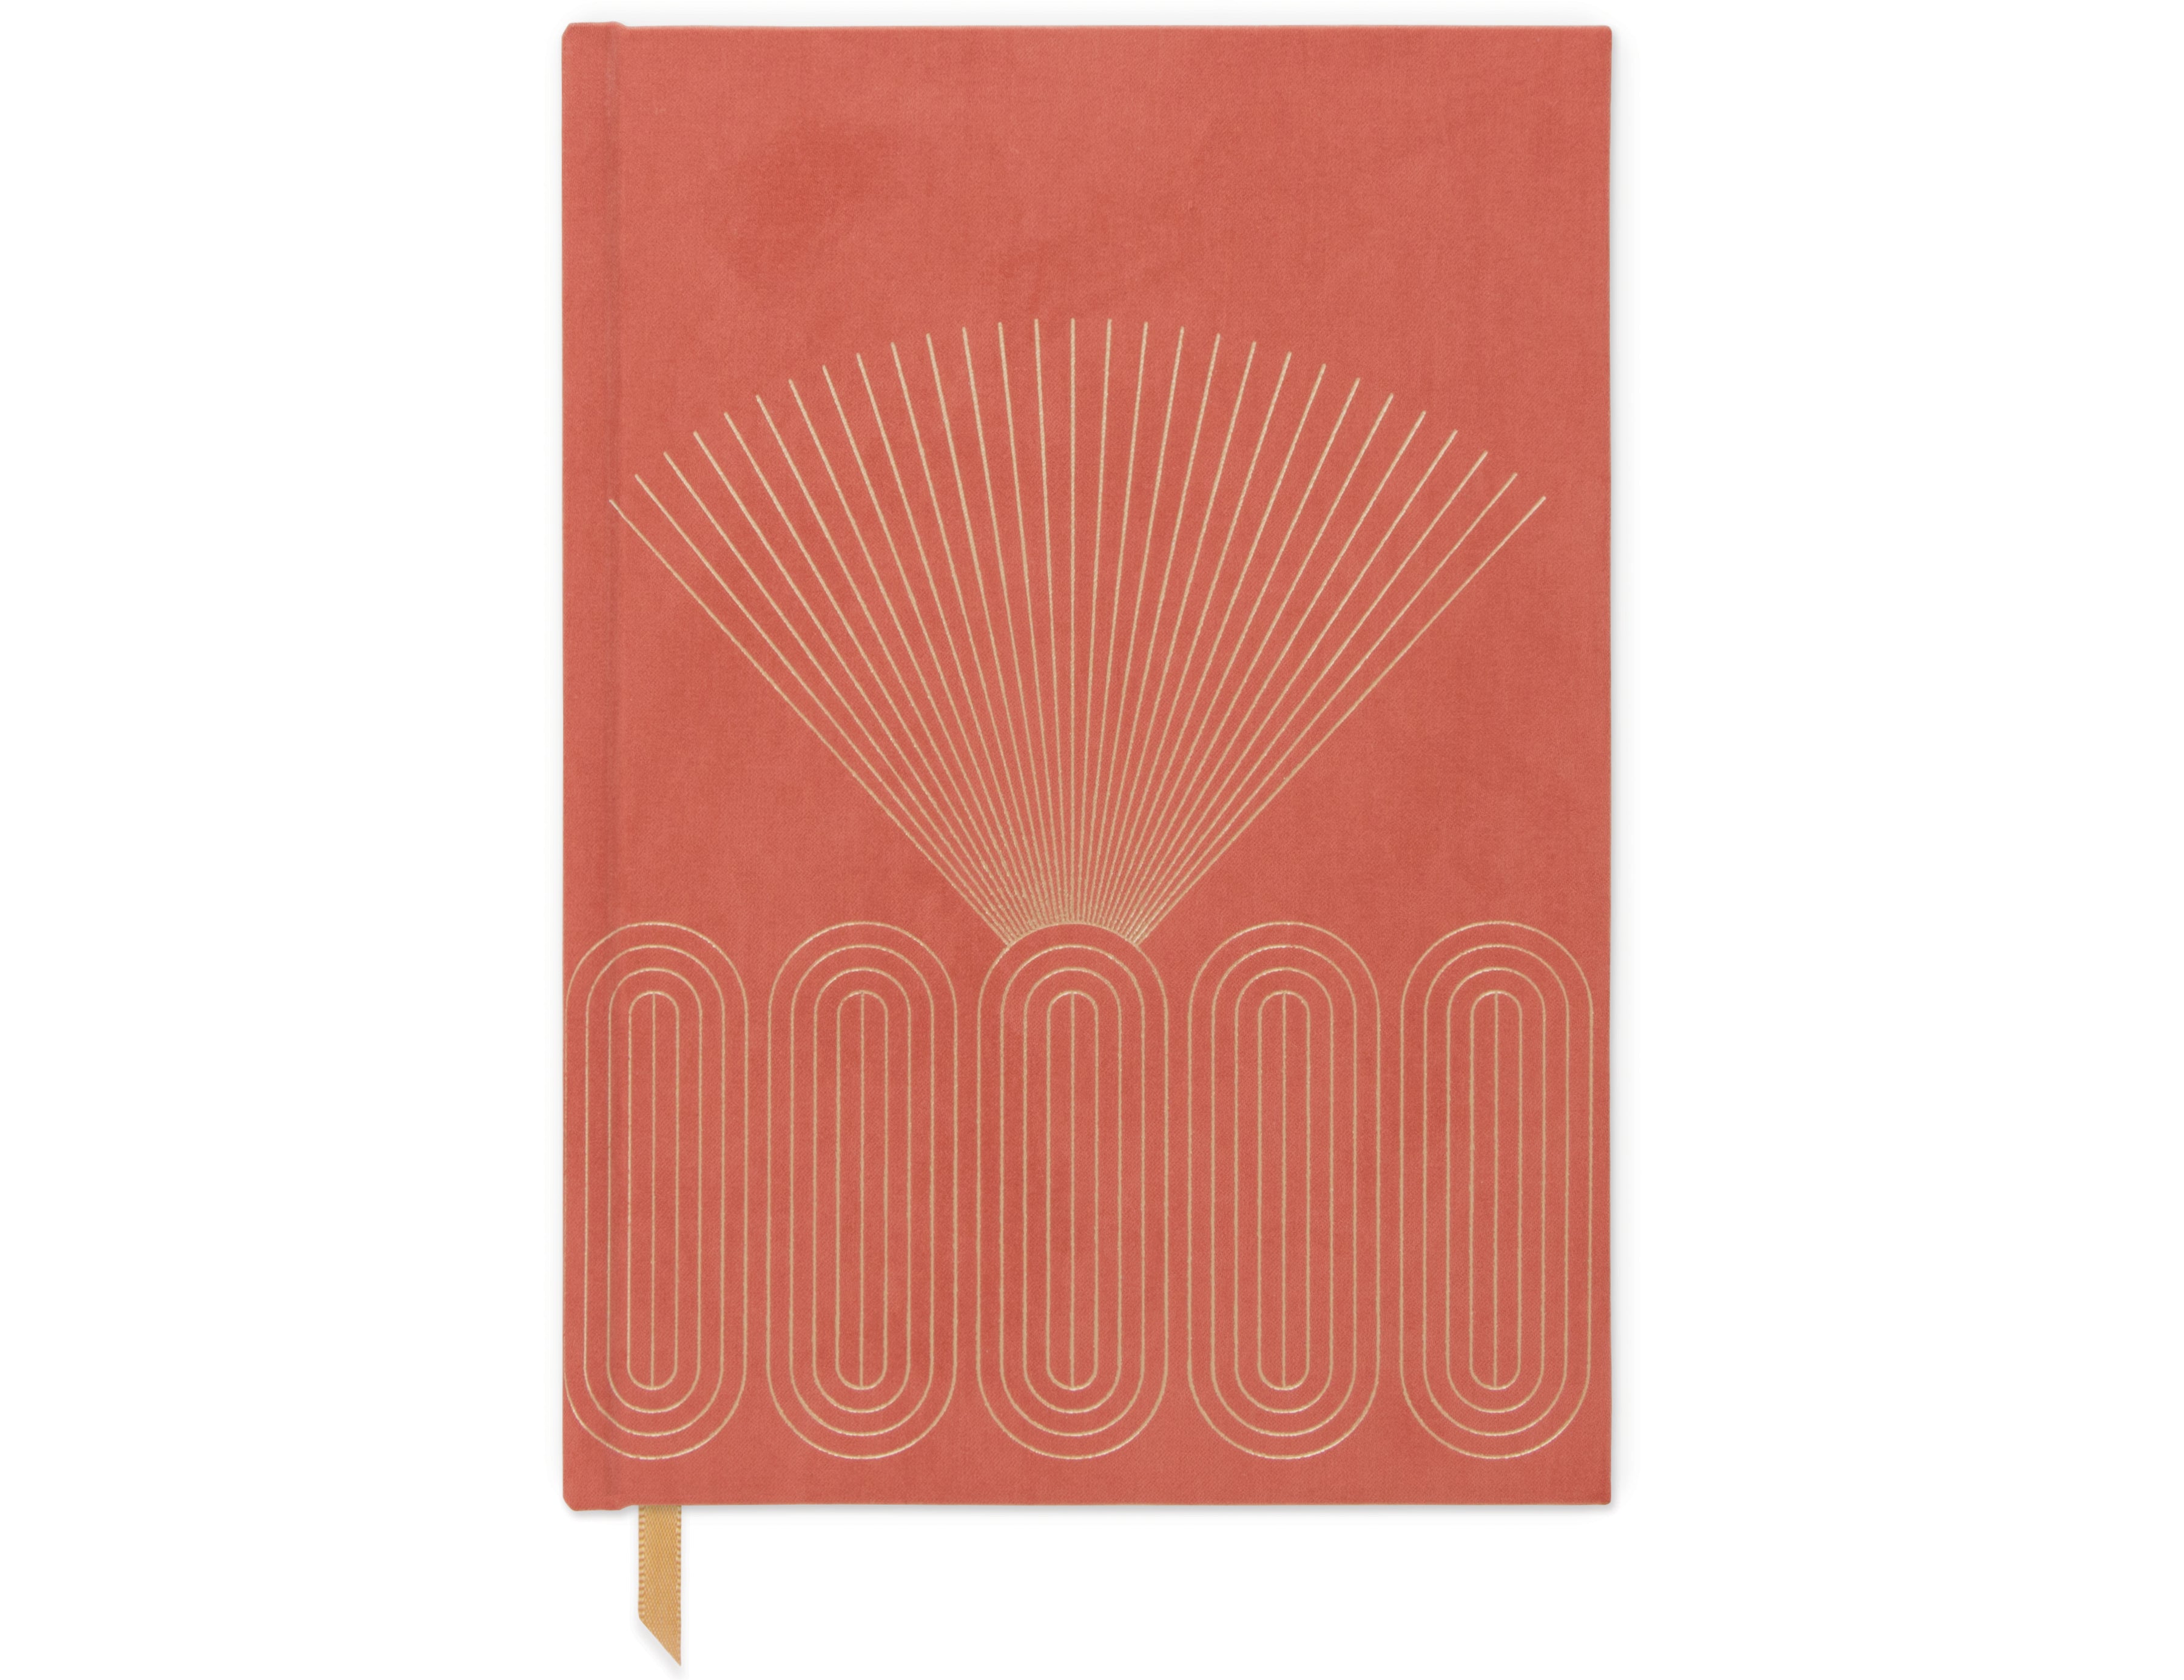 Orangey red Radiant Rays Hard Cover Suede Cloth Journal with pocket, gold geometric design and gold ribbon bookmark. White background. 